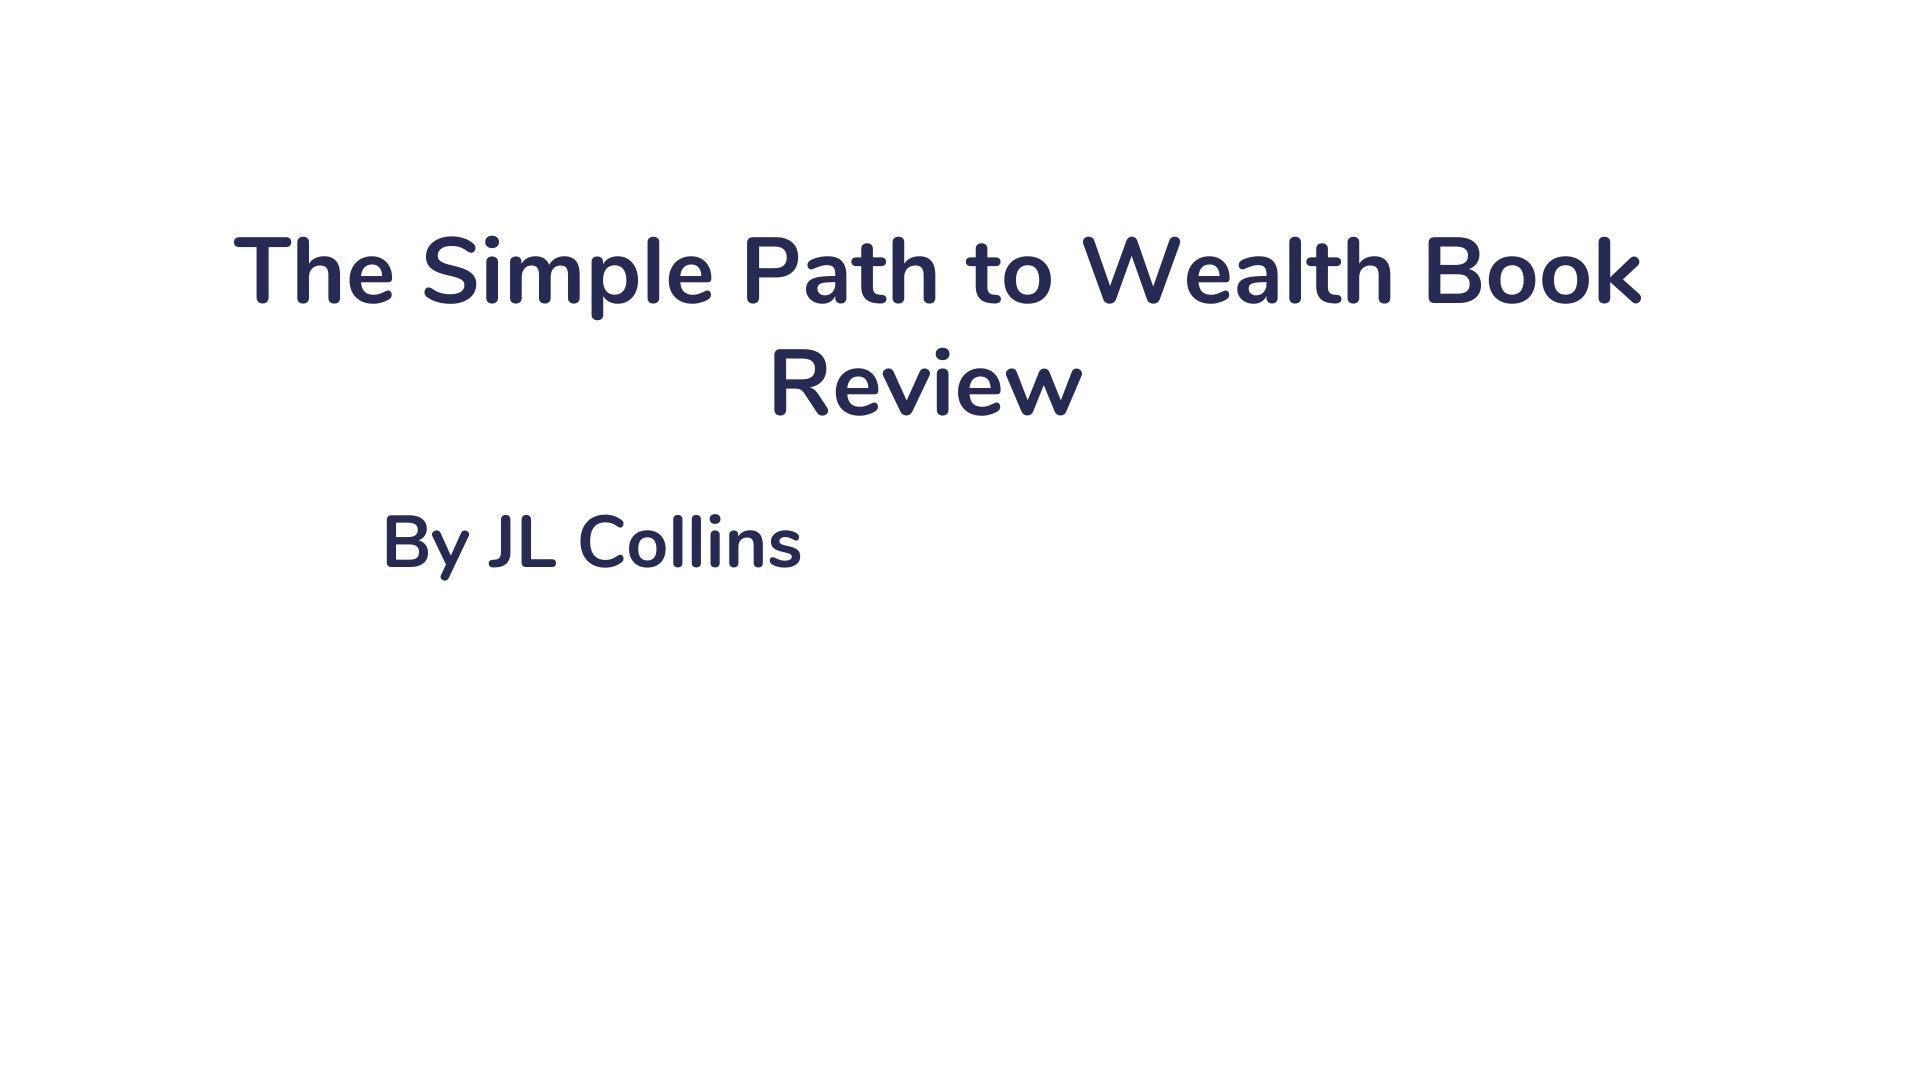 JL Collins: The Simple Path to Wealth Book Review